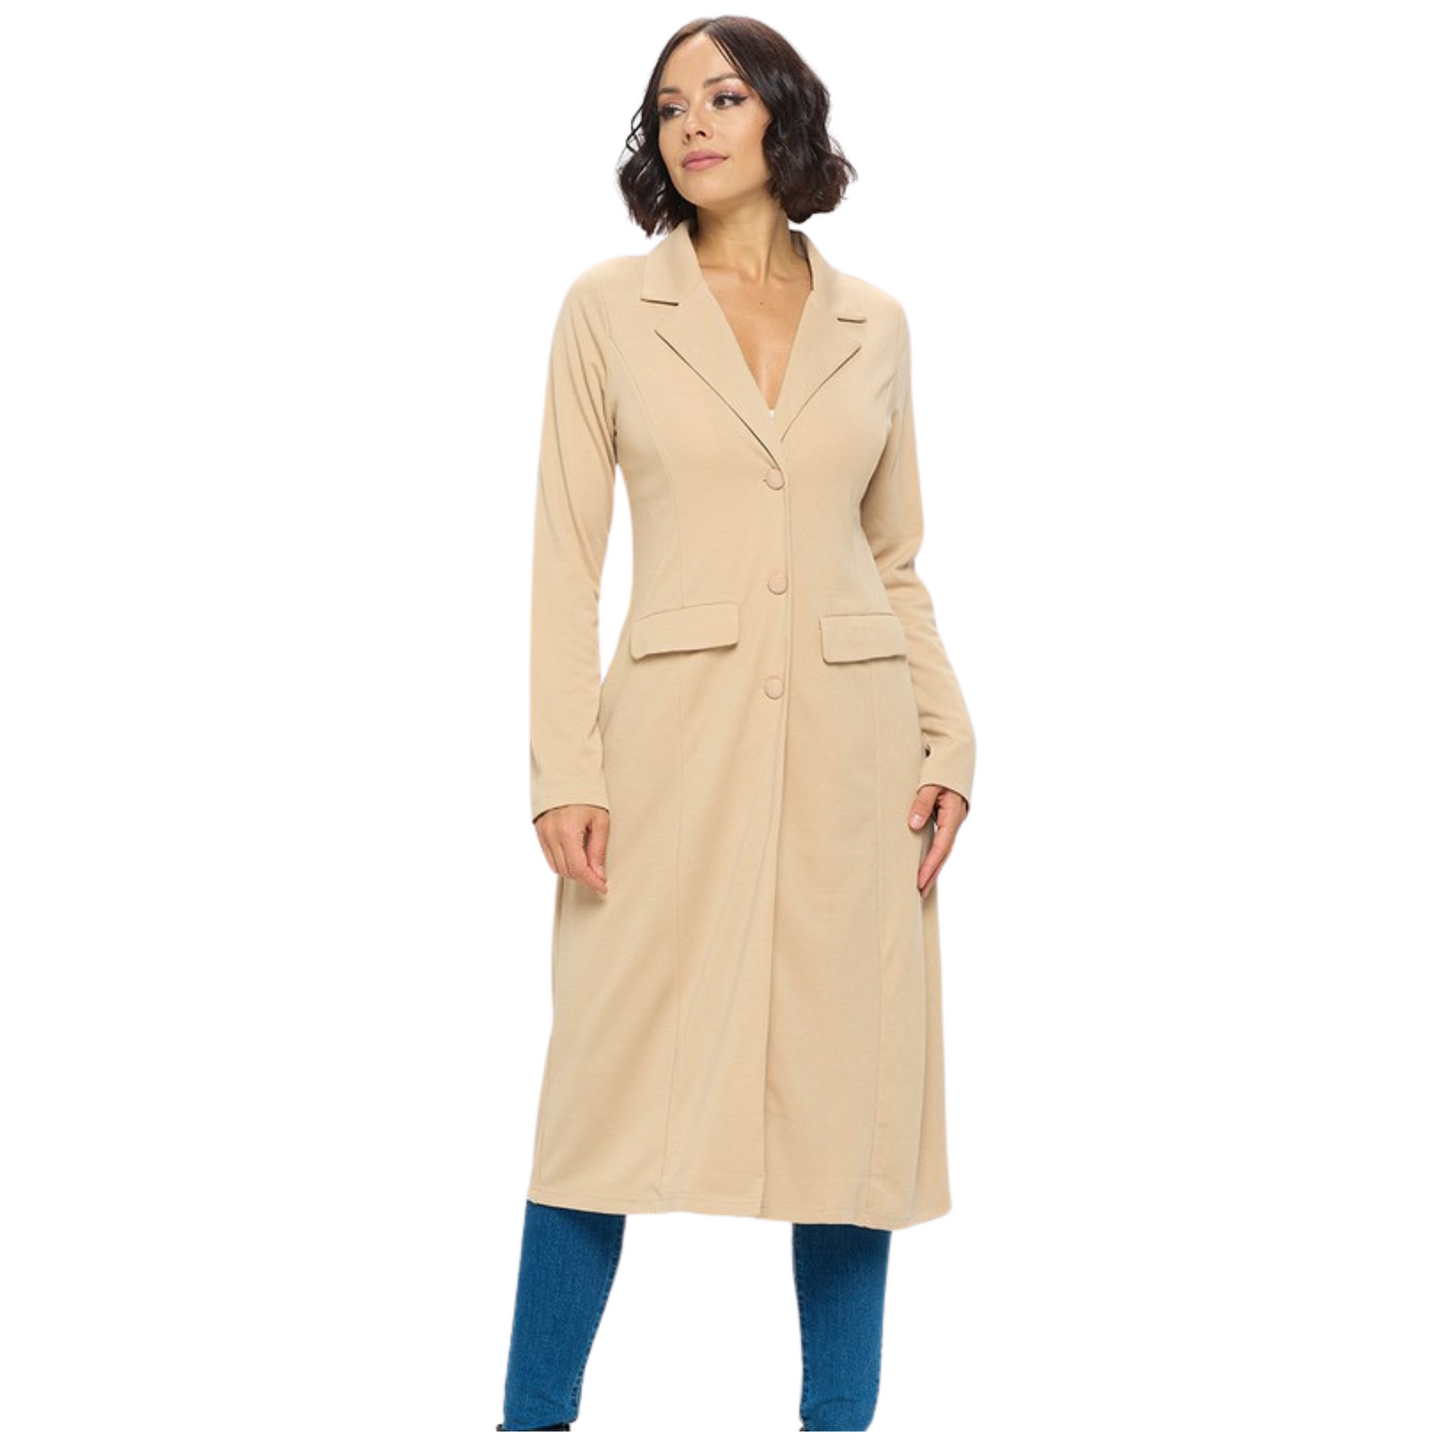 Ever B Light Weight Trench Coat Beige & Black S-L